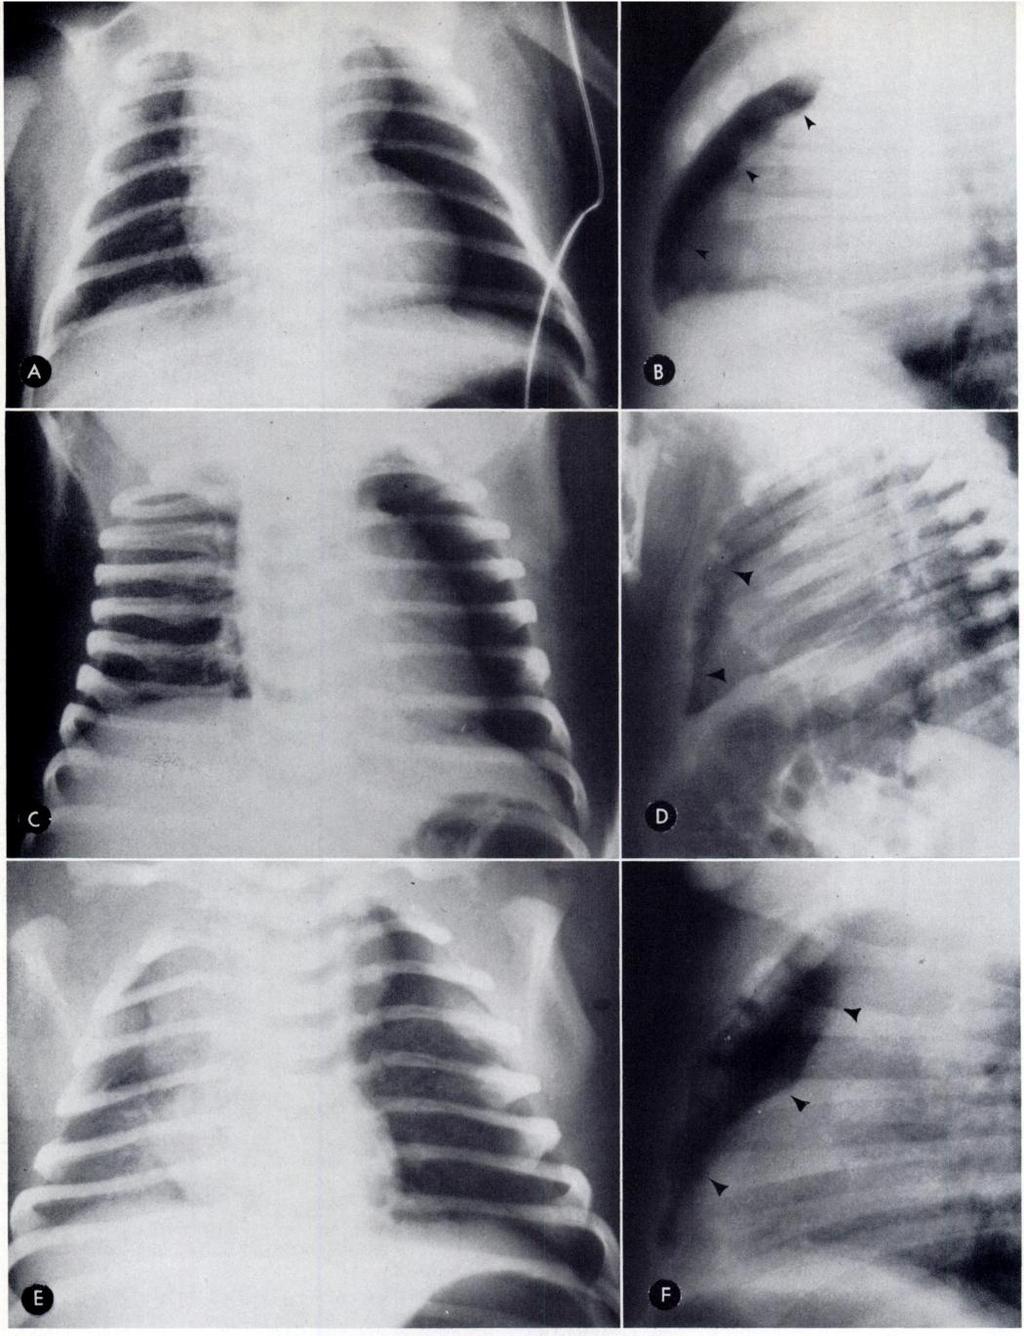 - :.Th -:, -, Fig. 1 -Large, hyperlucent hemithorax sign with sharp ipsilateral mediastinal edge showing varying degrees of abnormality.